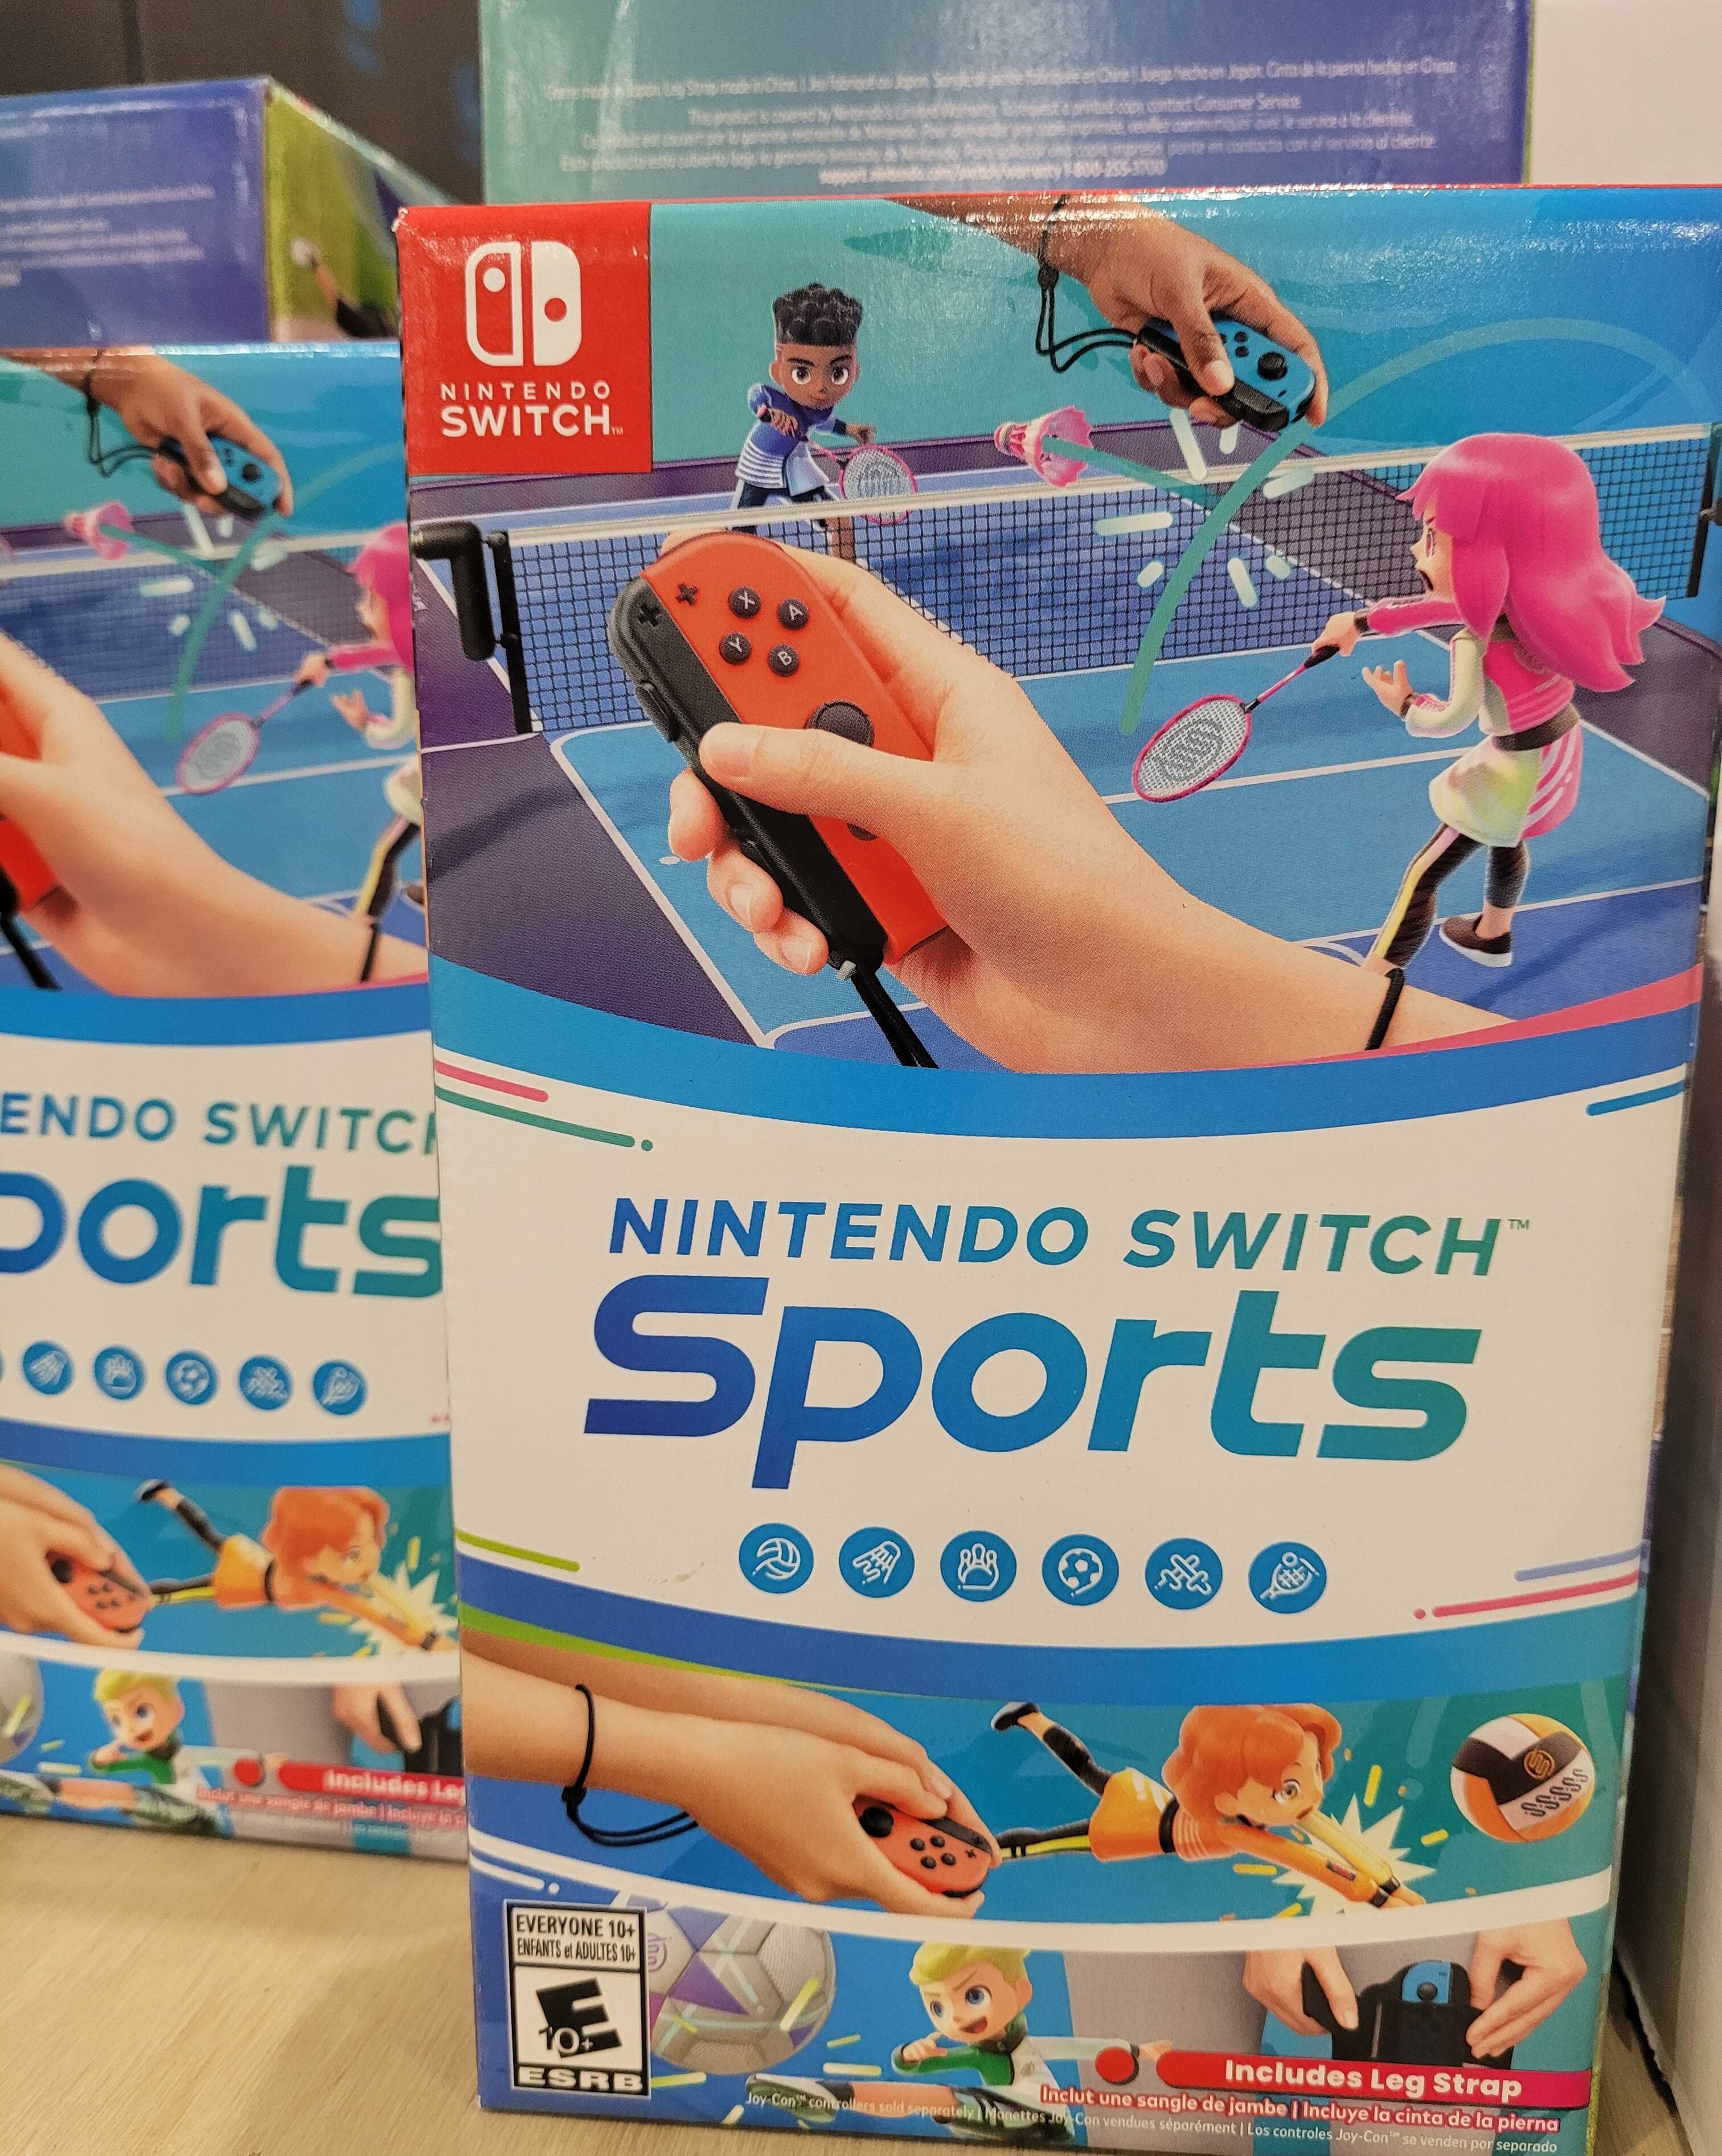 Costco] Nintendo Switch Sport with leg strap 29.97 - RedFlagDeals